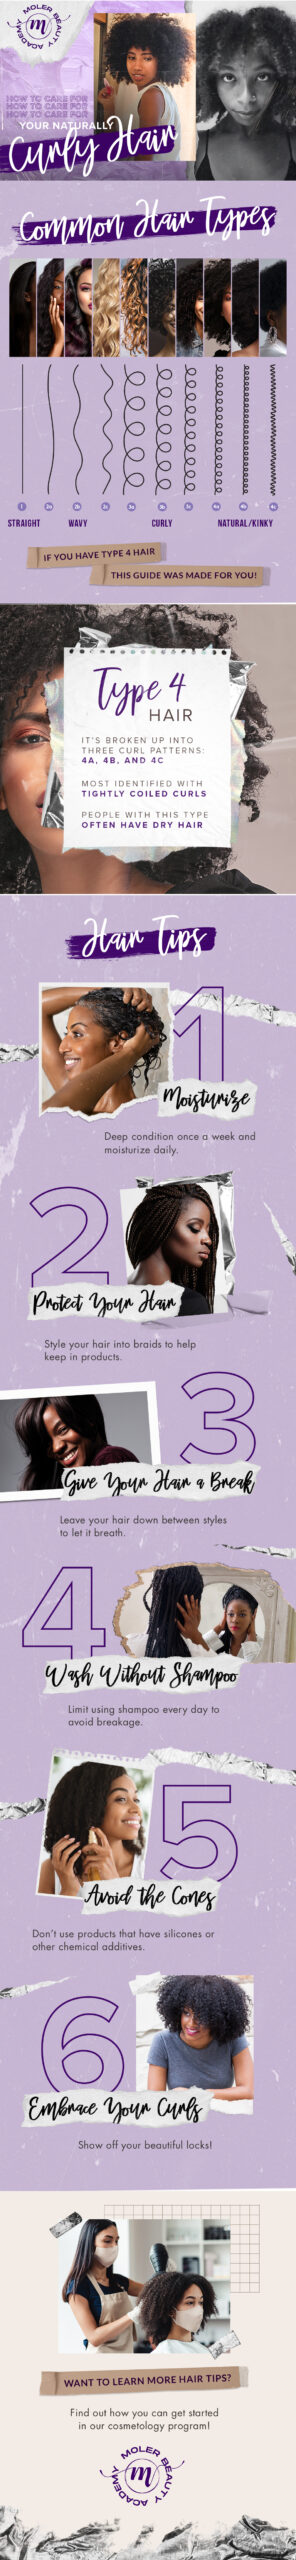 inforgraphic on how to care for natural hair